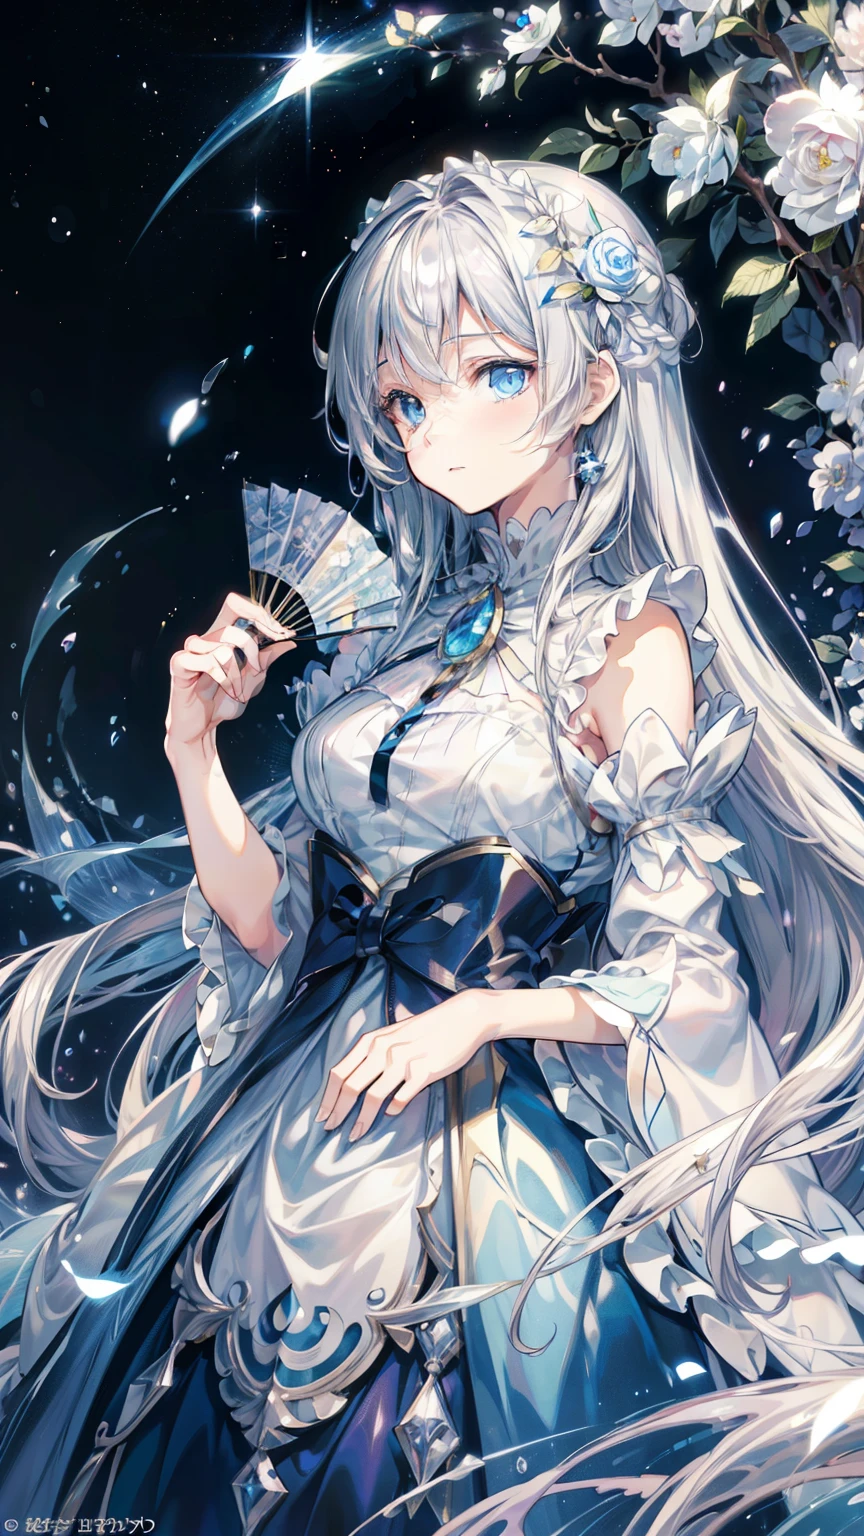 official art, European masterpiece women,, light silver hair , deep blue eyeasterpiece、highest quality、High resolution: 1.4),in 8K, anime art nouveau, Highly detailed exquisite fan art, anime fantasy illustration, clean detailed anime art, detailed anime art, sharp focus of a person, delicate Beautiful Hair and Eyes and Face, realistic, super detailed, flower garden,((delicate, Delicate and cute hands)),((elegant shiny dress)),((lots of races)),((lots of frills)),((lots of ribbons))